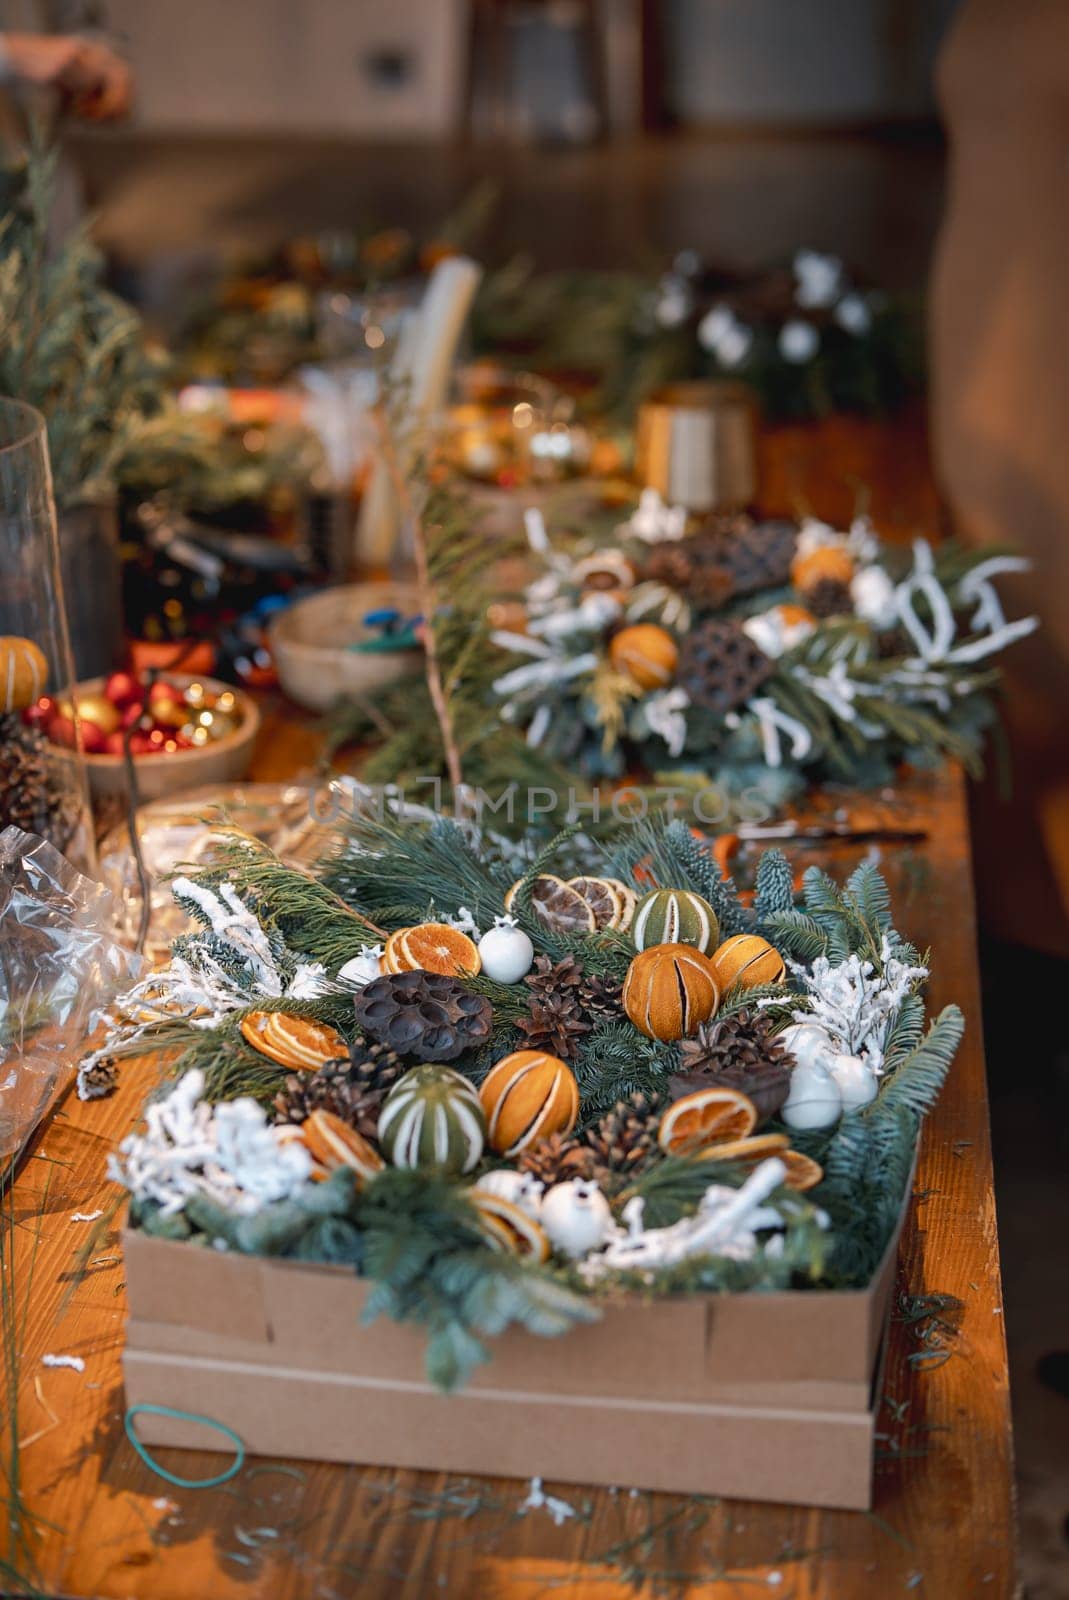 DIY session for creating Christmas wreaths and New Year's ornaments. by teksomolika